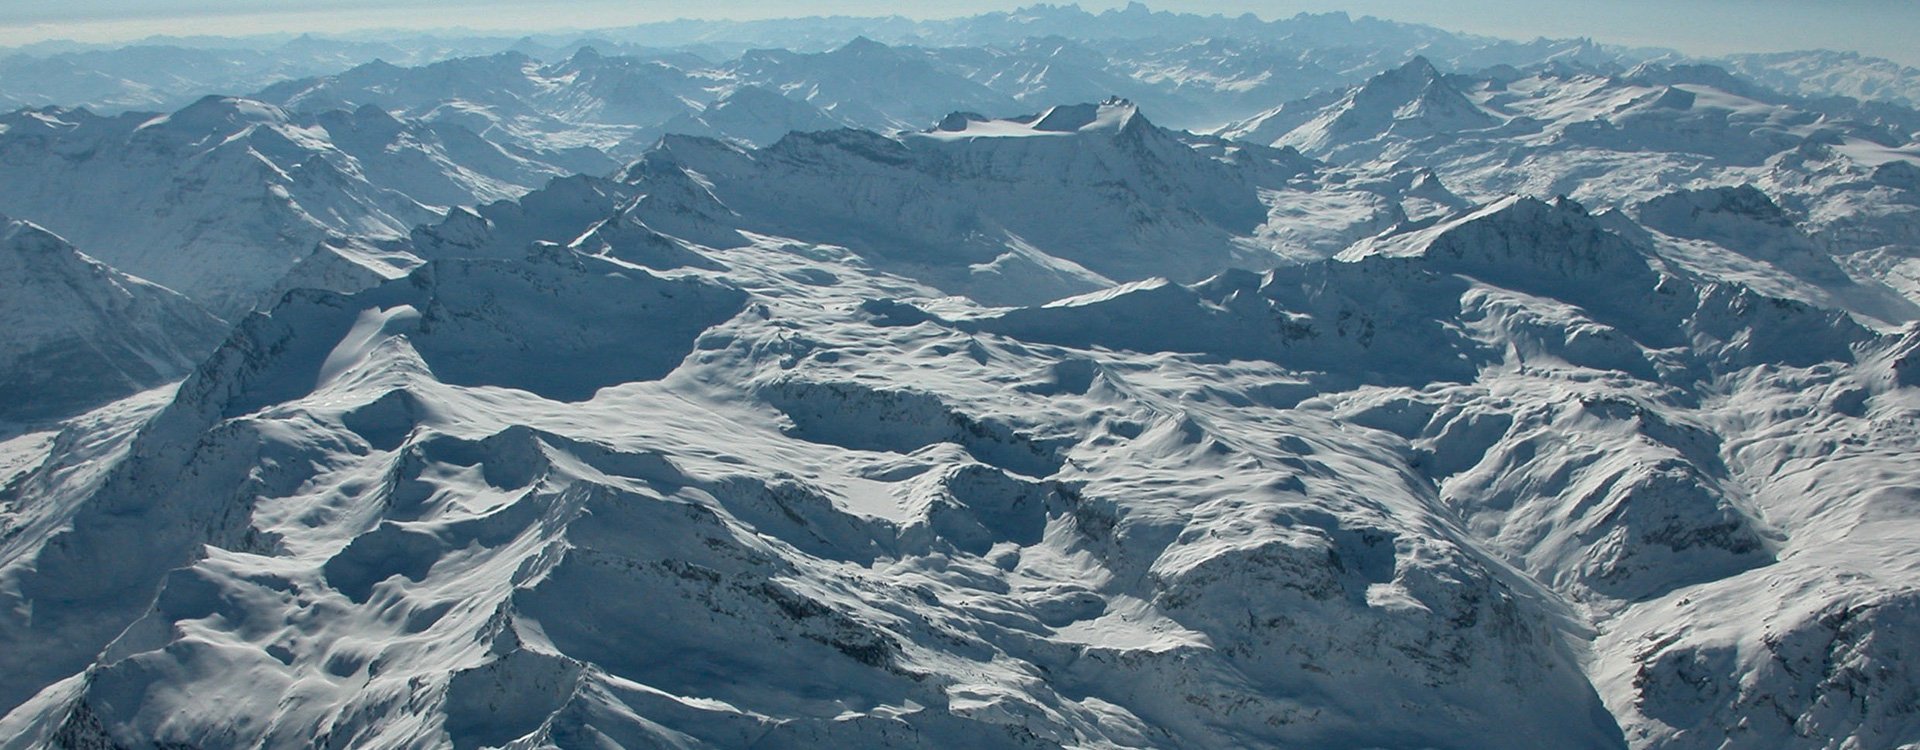 Val D'isere_Top View